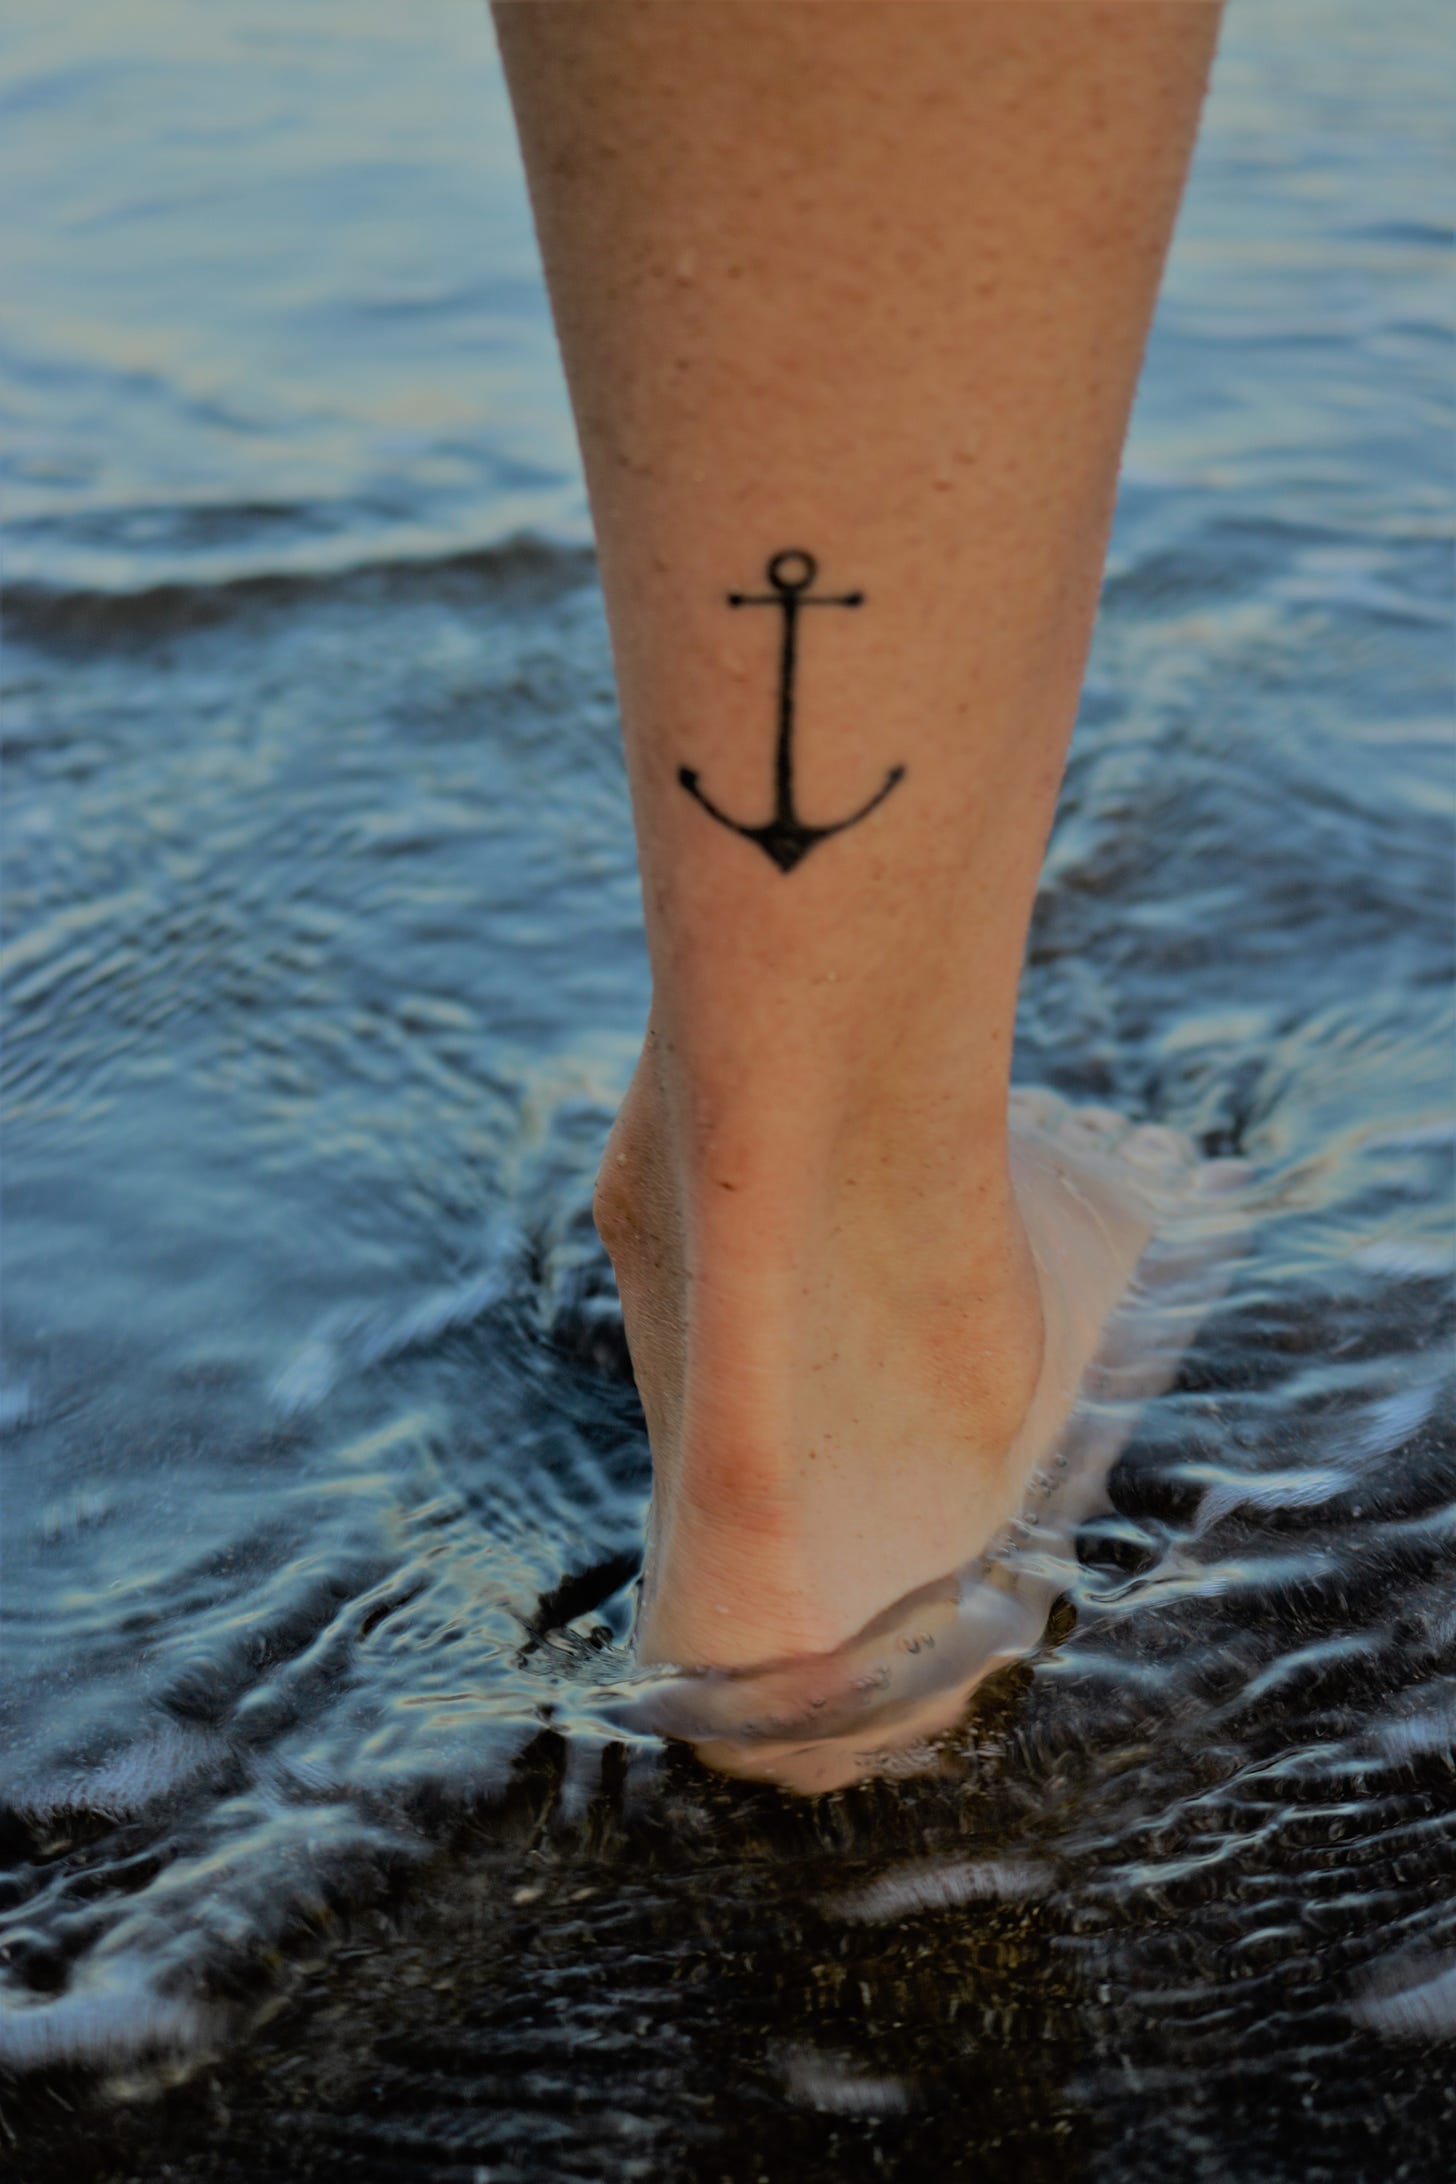 Back of a human calf above the Achilles tendon sporting a one dimensional anchor tattoo,standing in shallow water